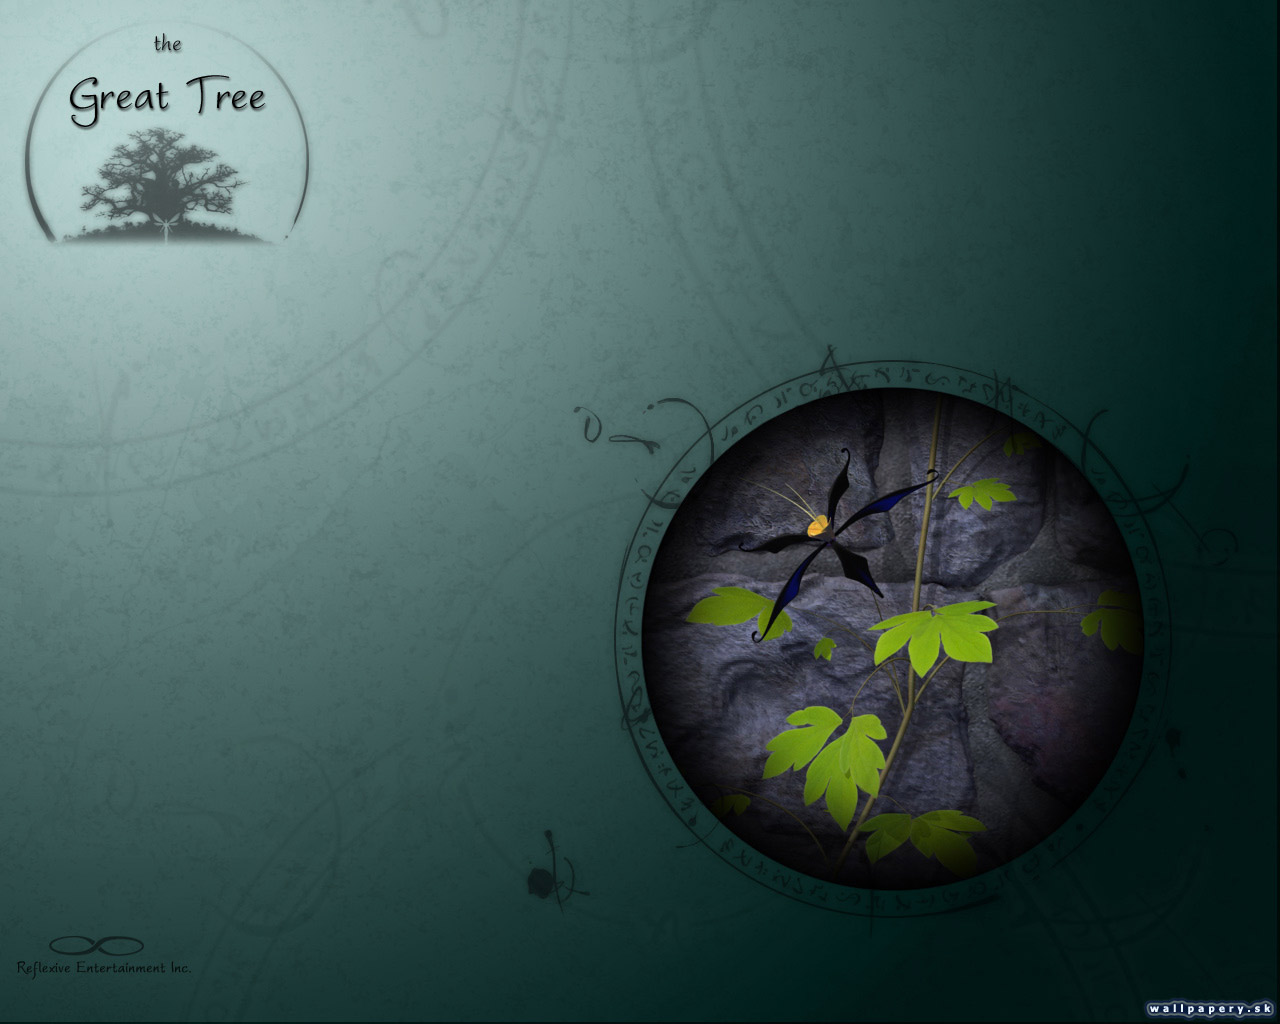 The Great Tree - wallpaper 2